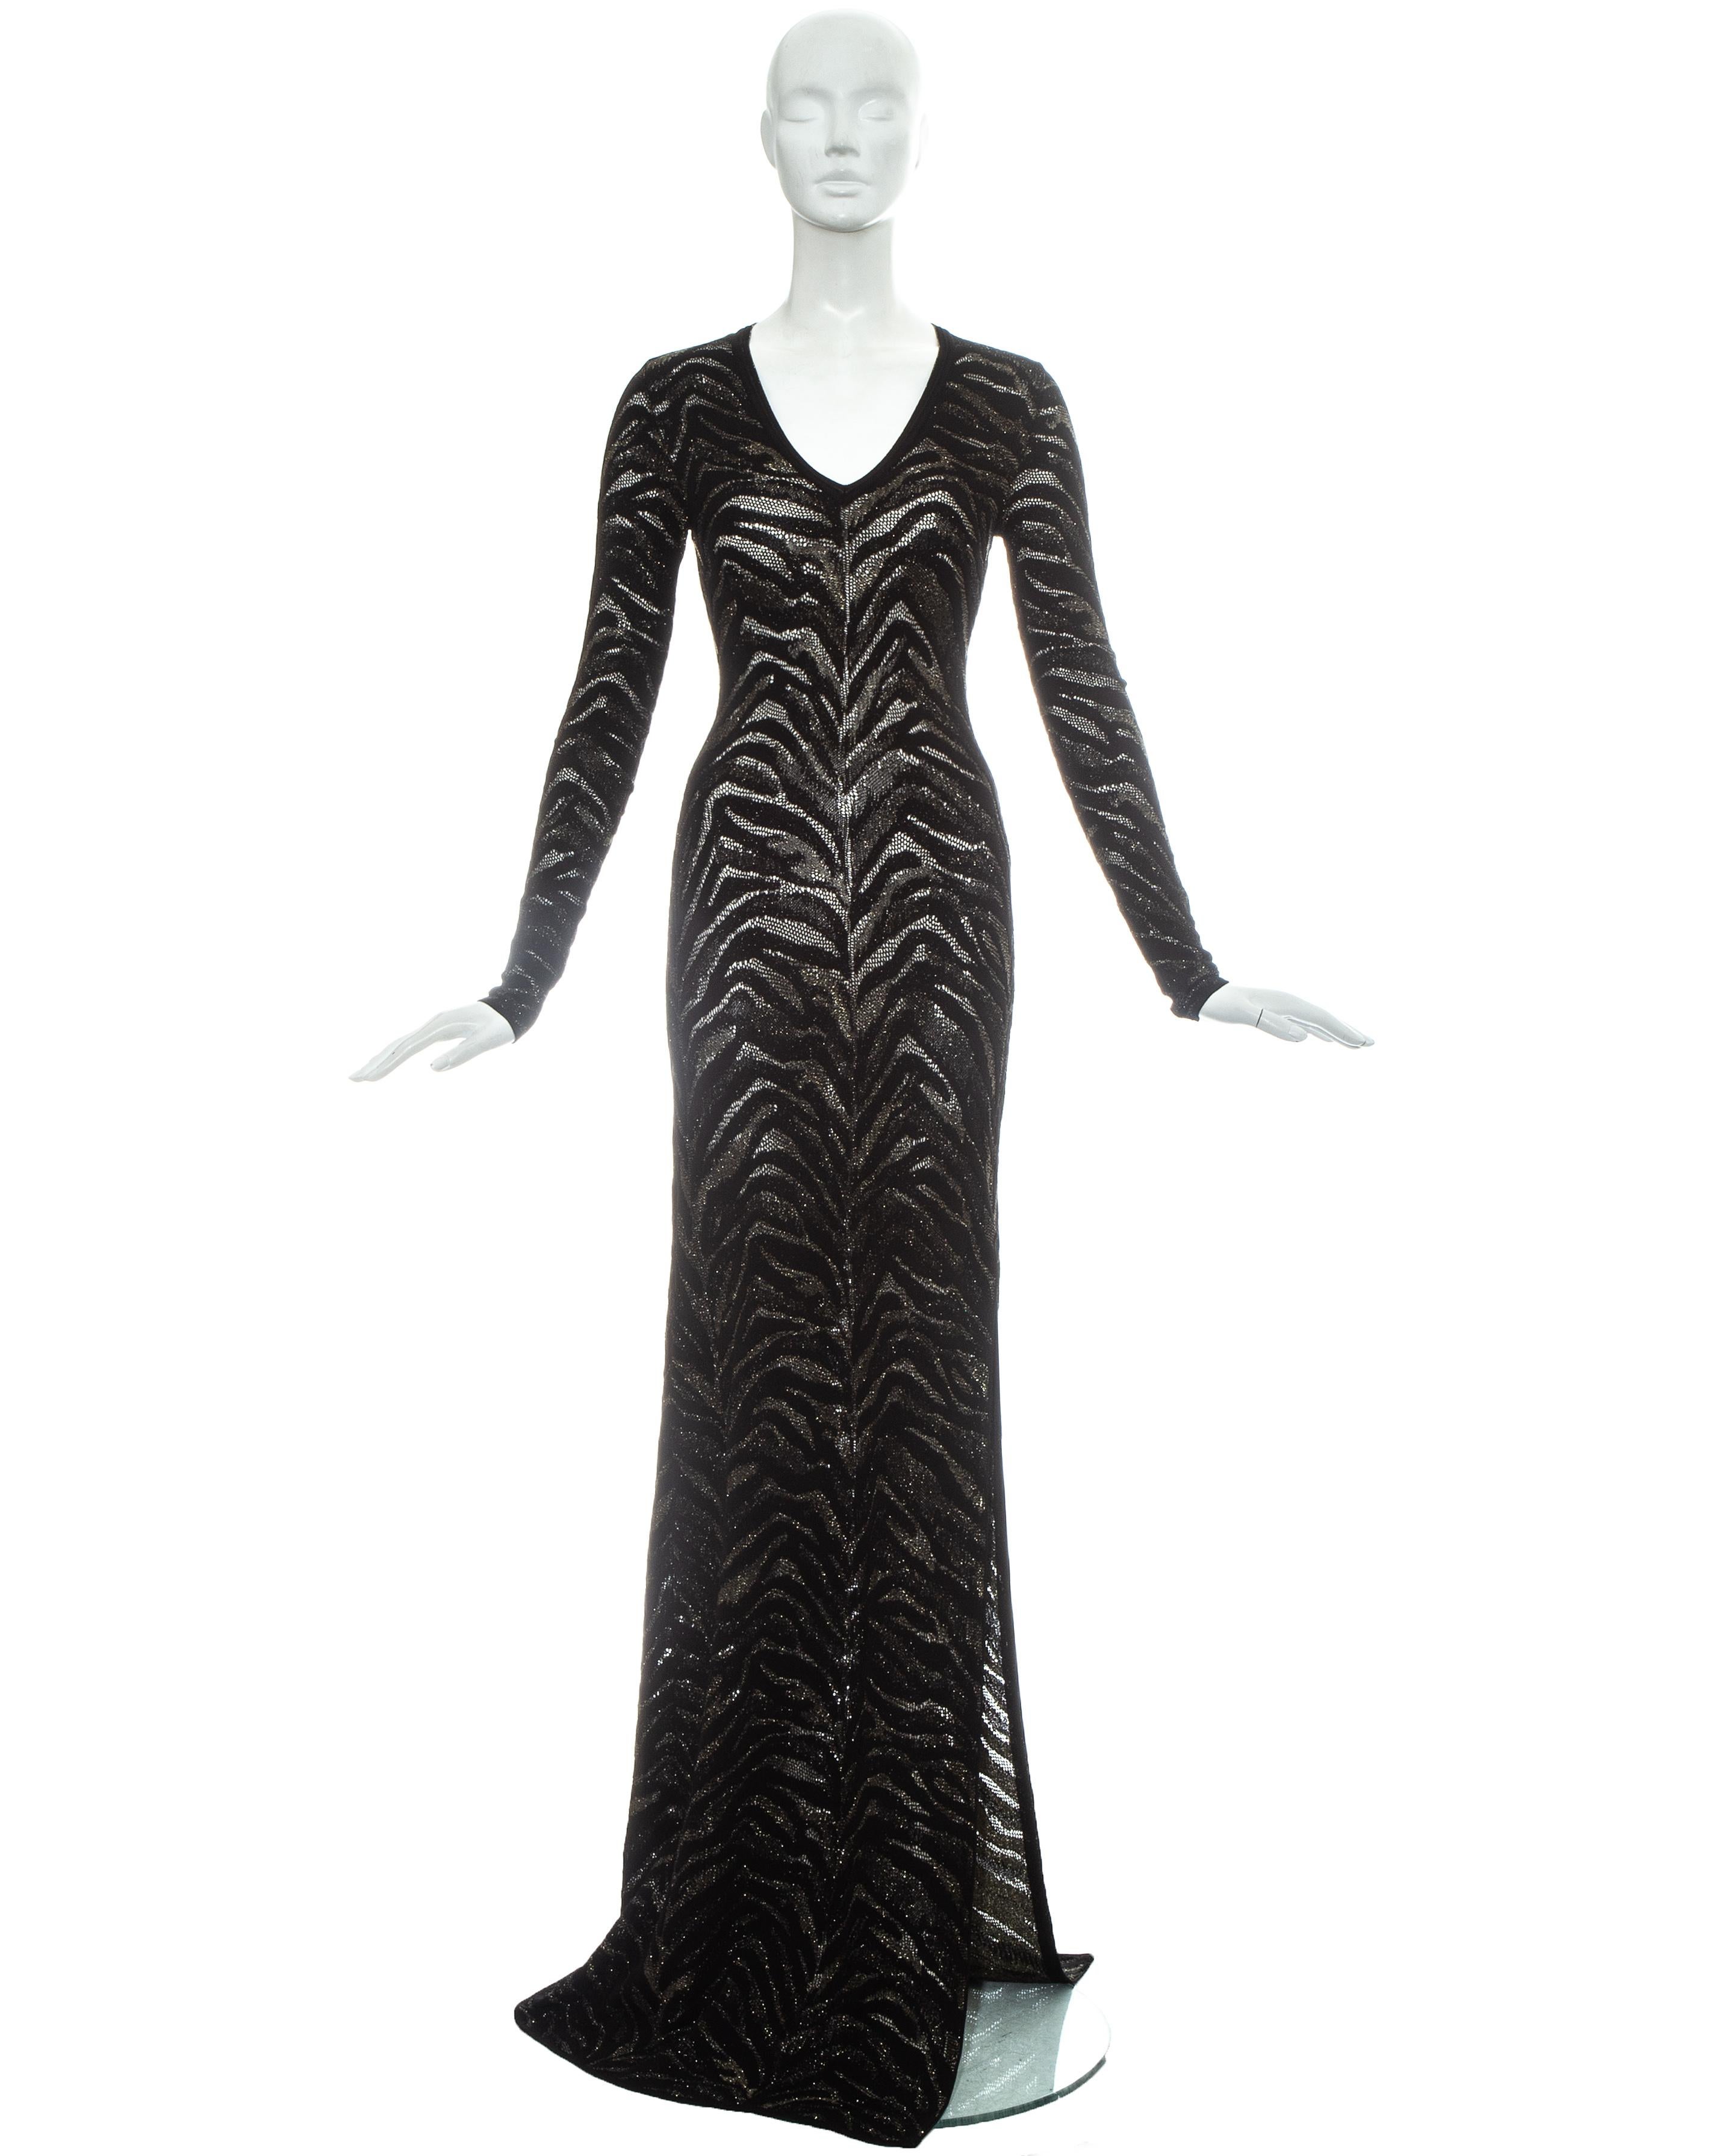 Roberto Cavalli black and gold lurex knitted evening dress with zebra print effect. 

c. 2000